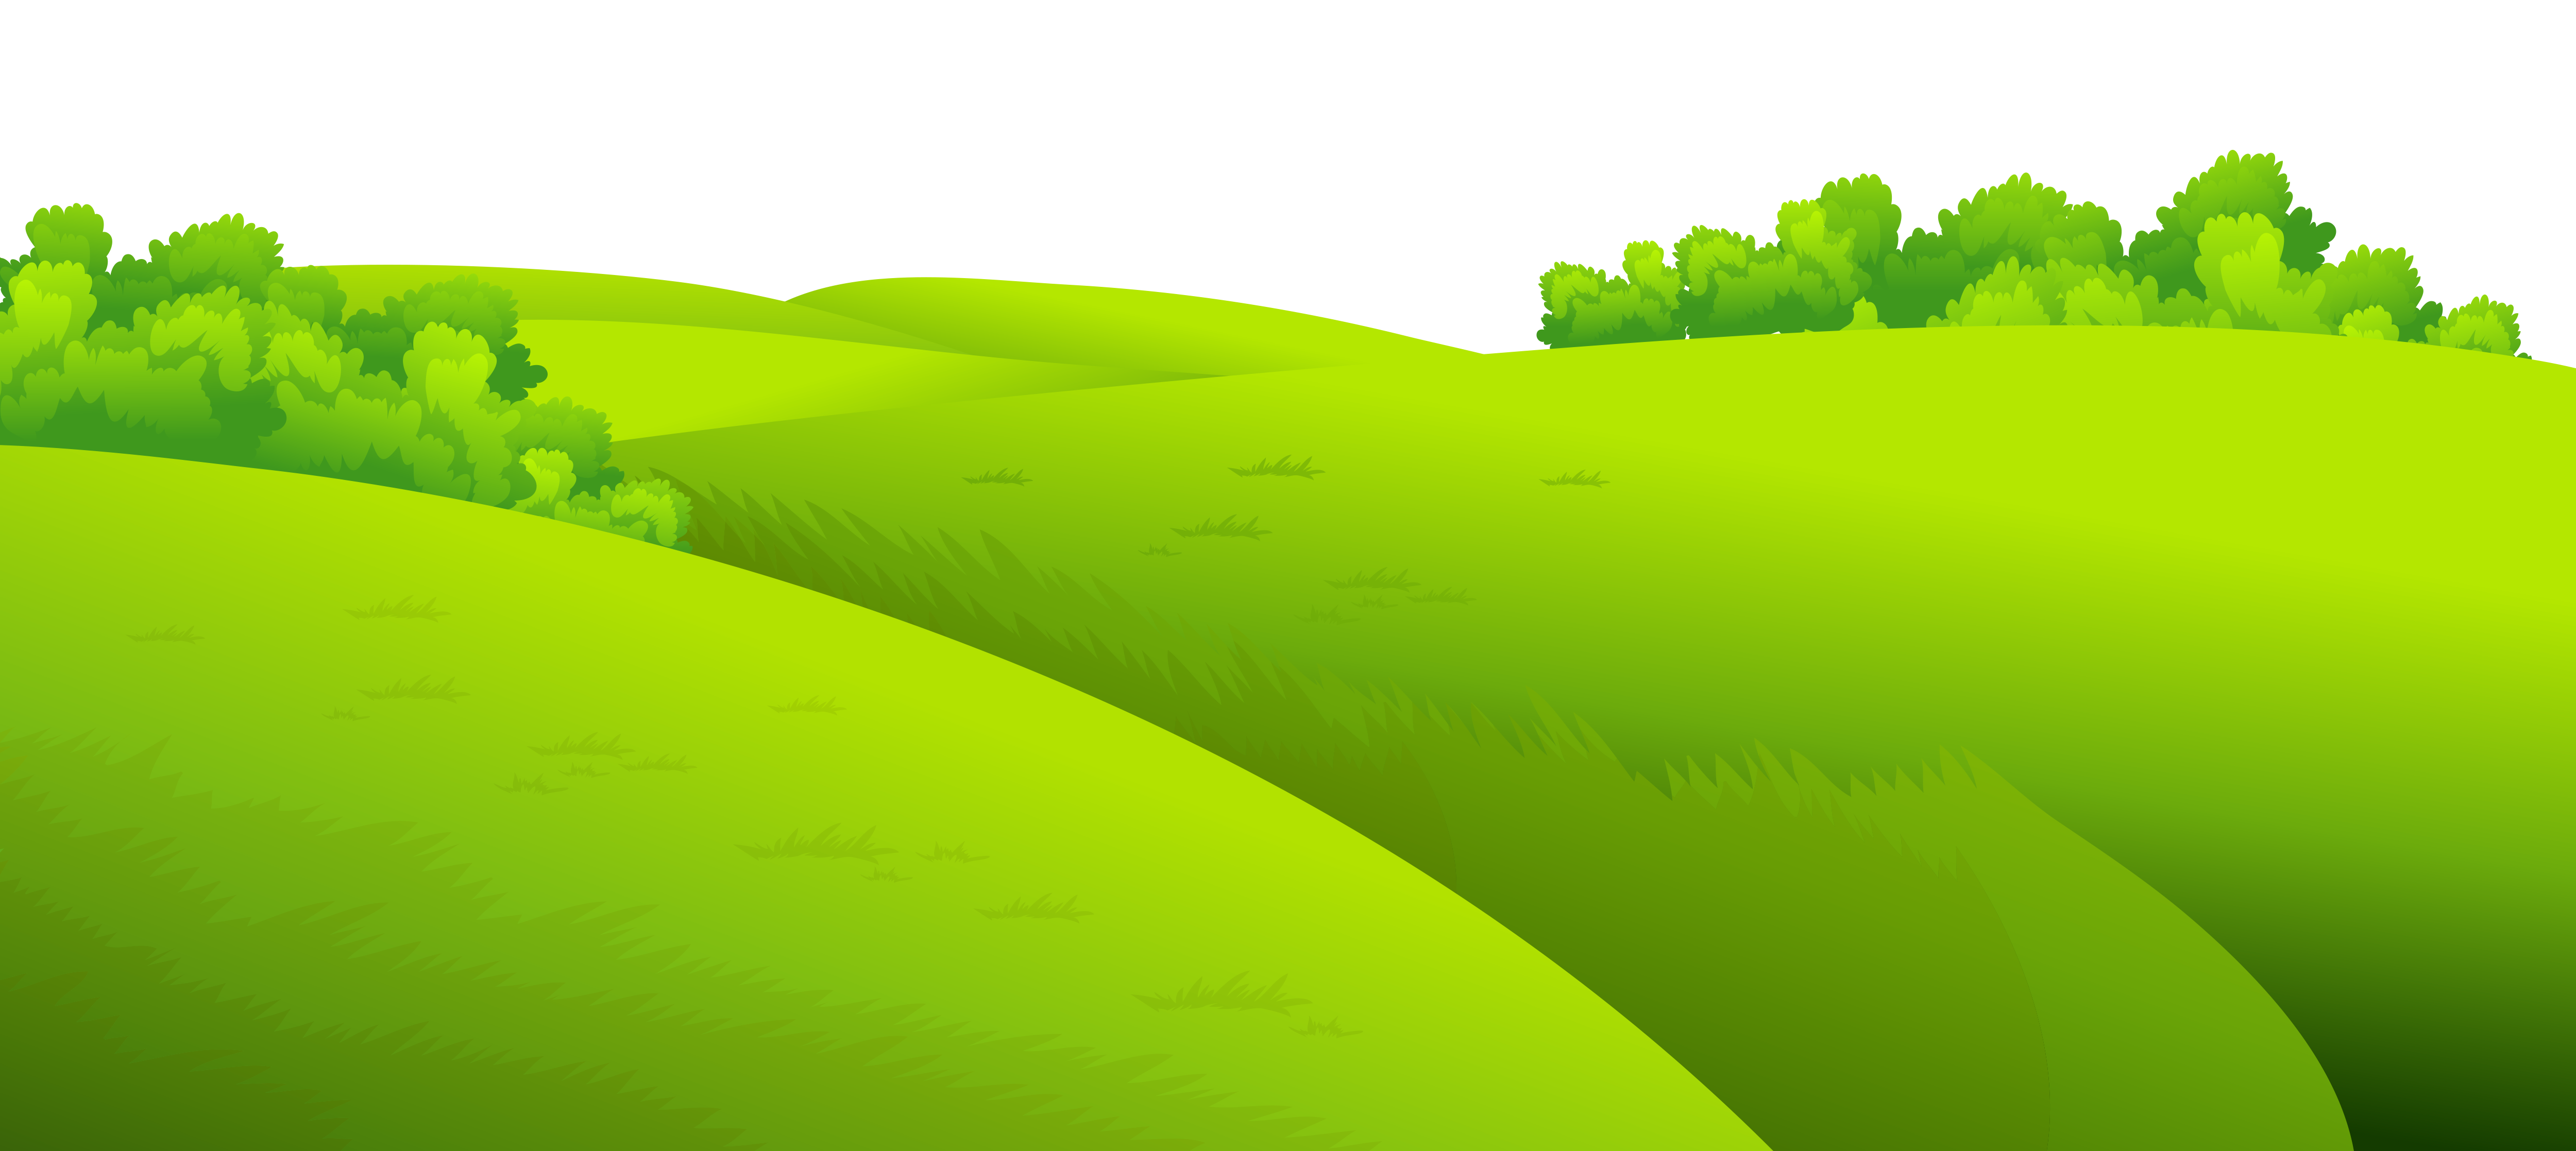 Green Grass Ground PNG Clip art​ | Gallery Yopriceville - High-Quality Free  Images and Transparent PNG Clipart